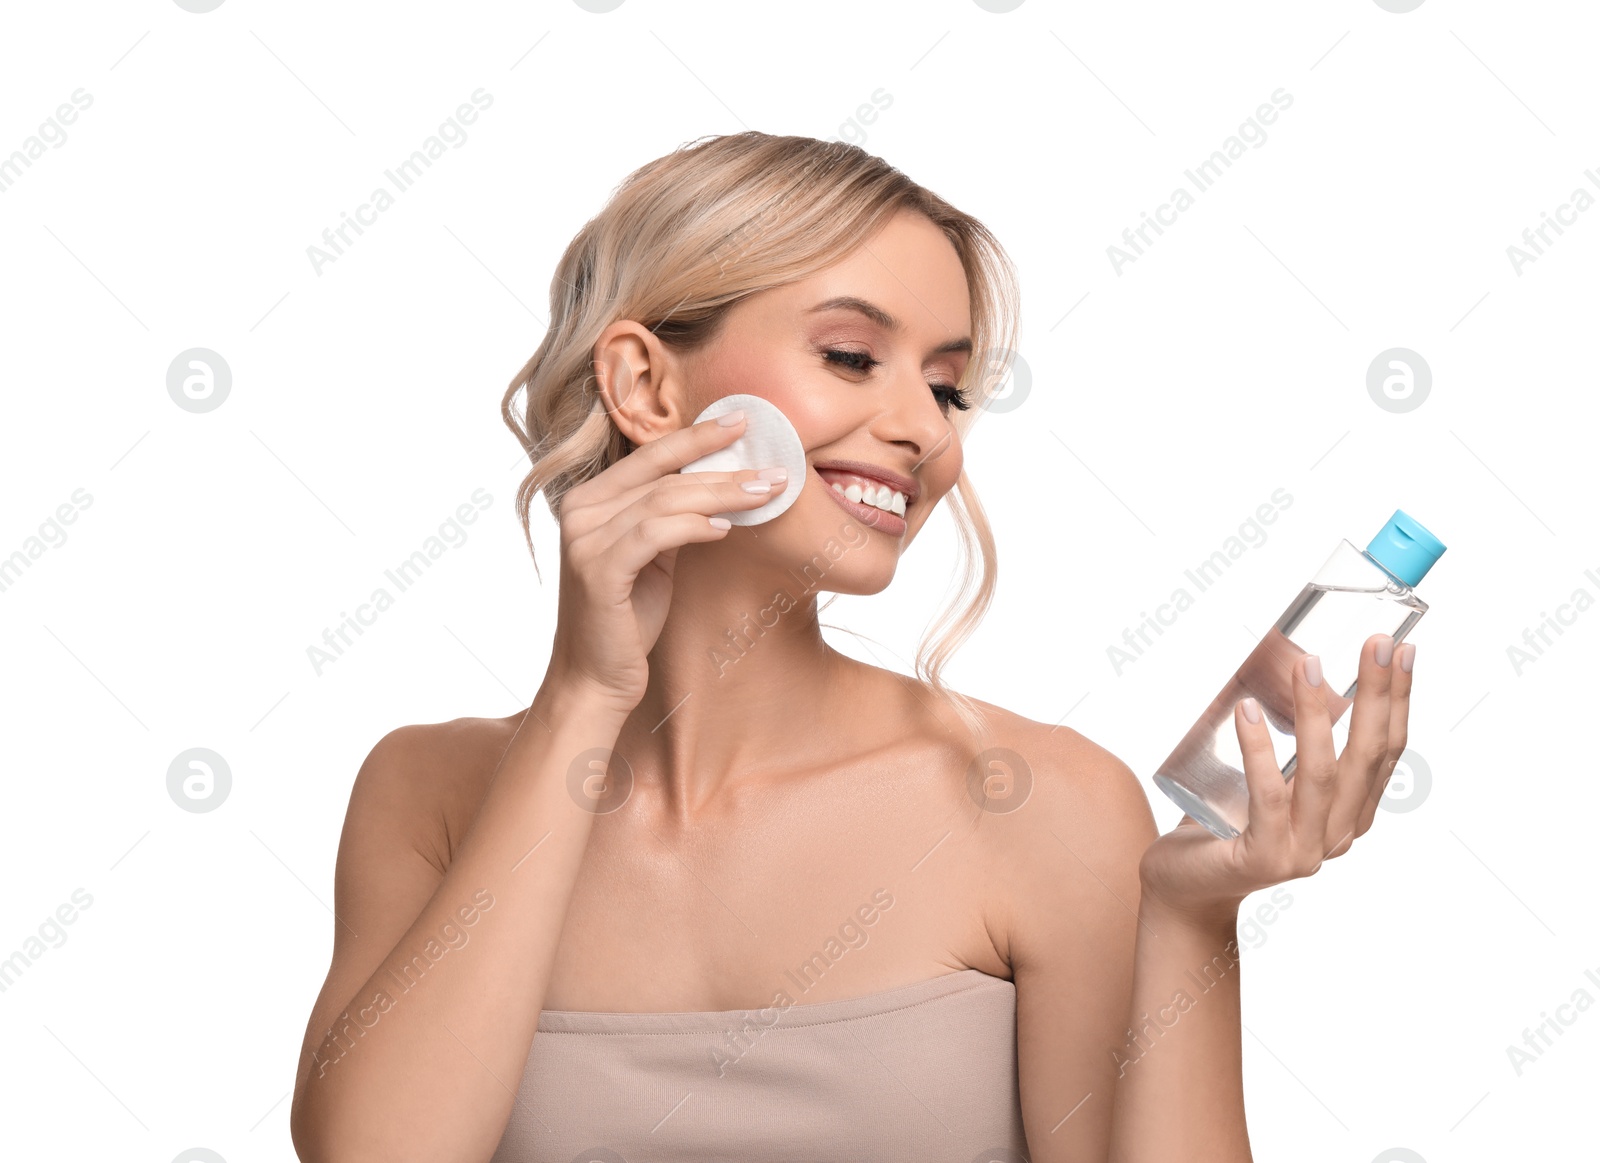 Photo of Smiling woman removing makeup with cotton pad and holding bottle on white background